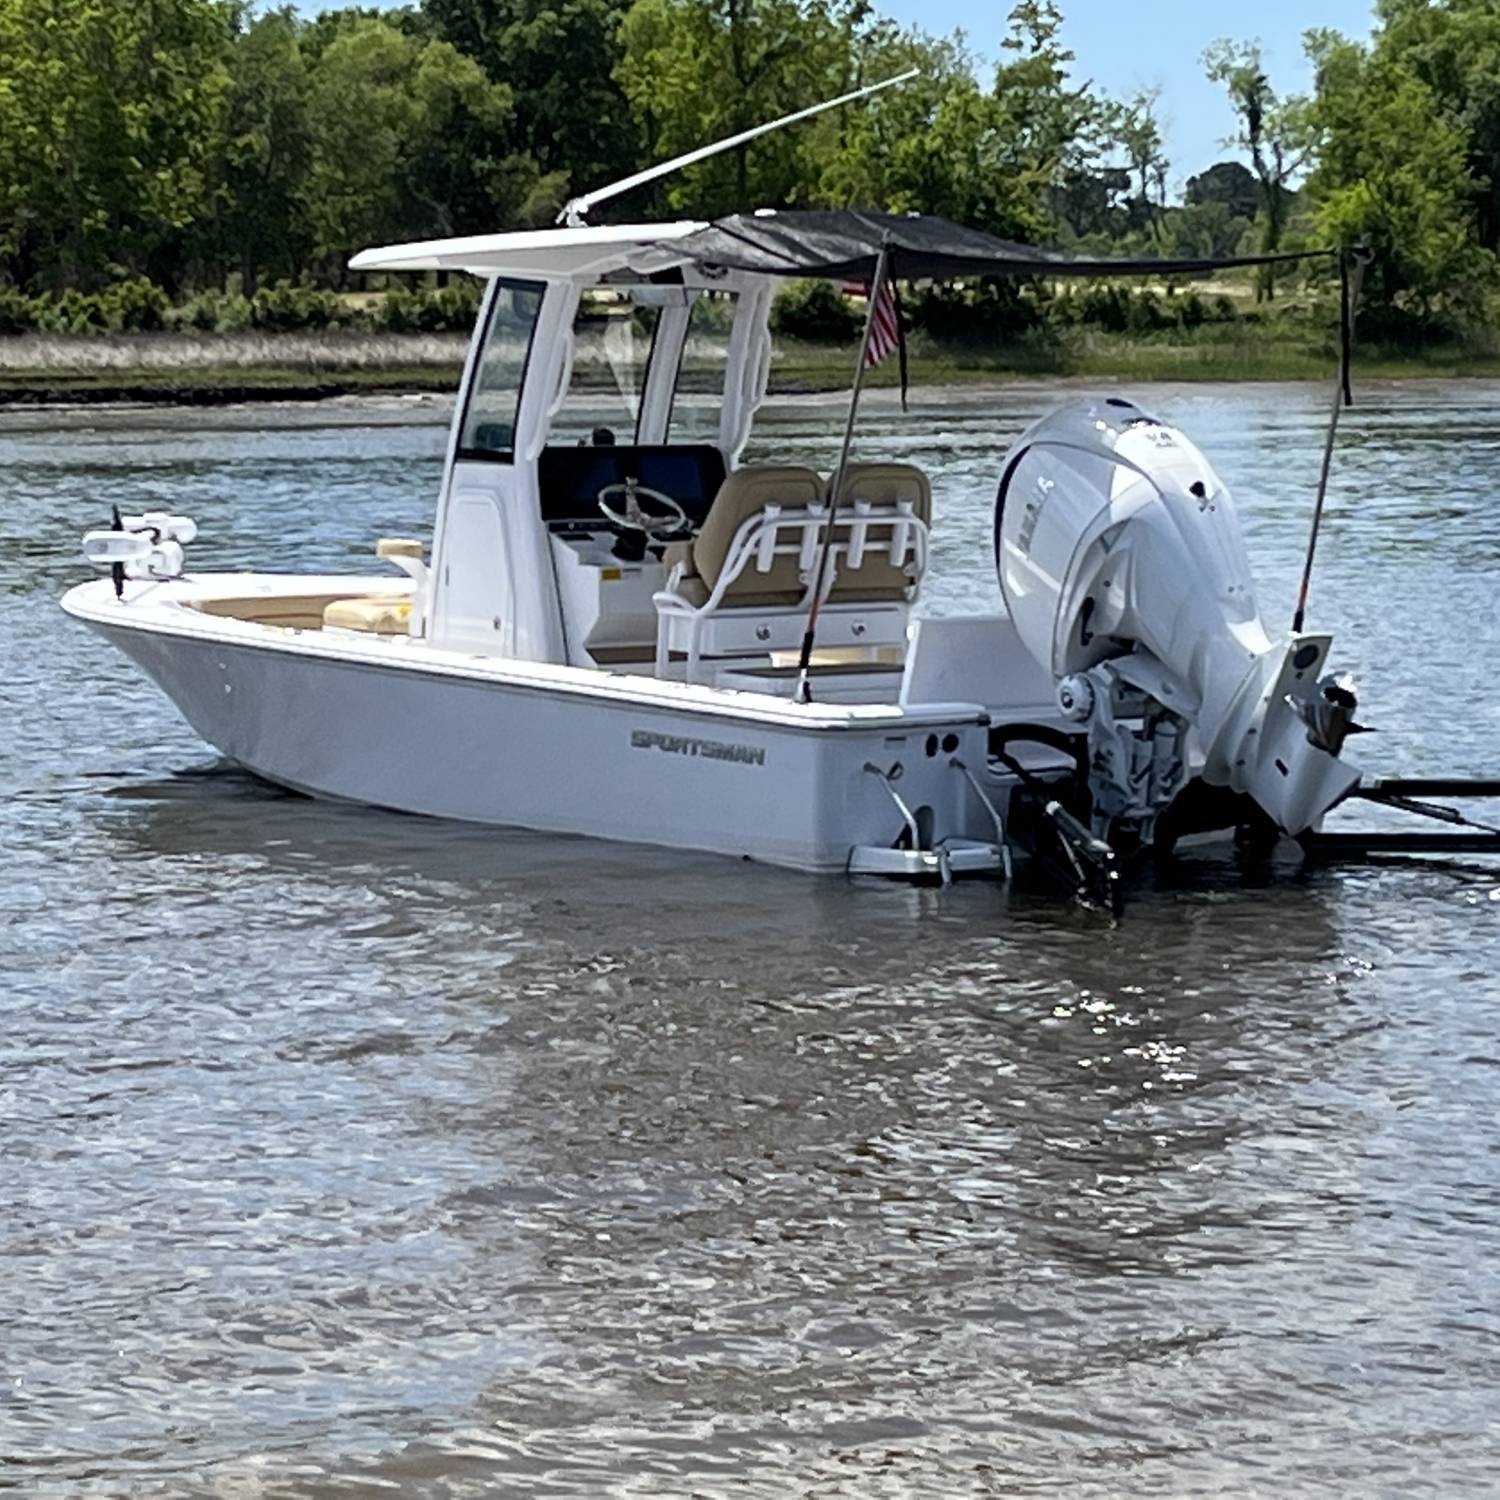 Title: 247OE at the sandbar - On board their Sportsman Masters 247OE Bay Boat - Location: Charleston, SC. Participating in the Photo Contest #SportsmanMay